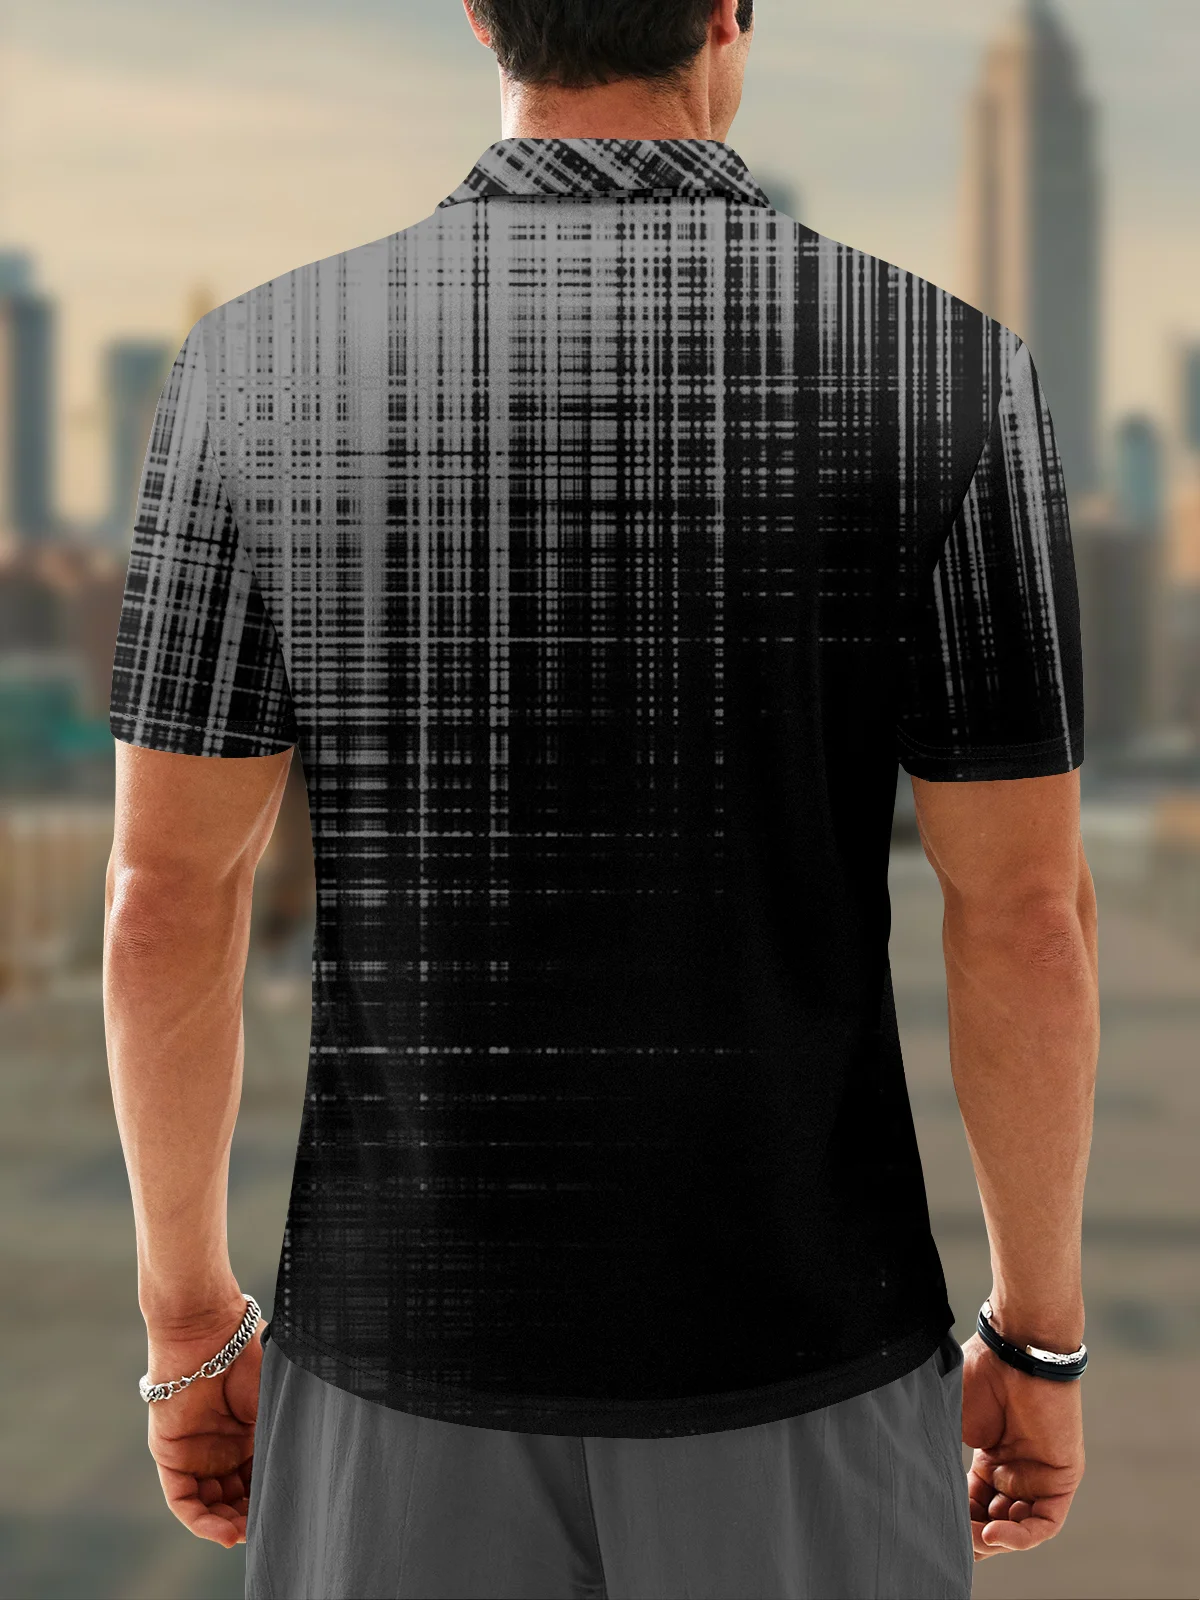 Hardaddy Moisture-wicking Golf Polo 3D Abstract Gradient Plaid